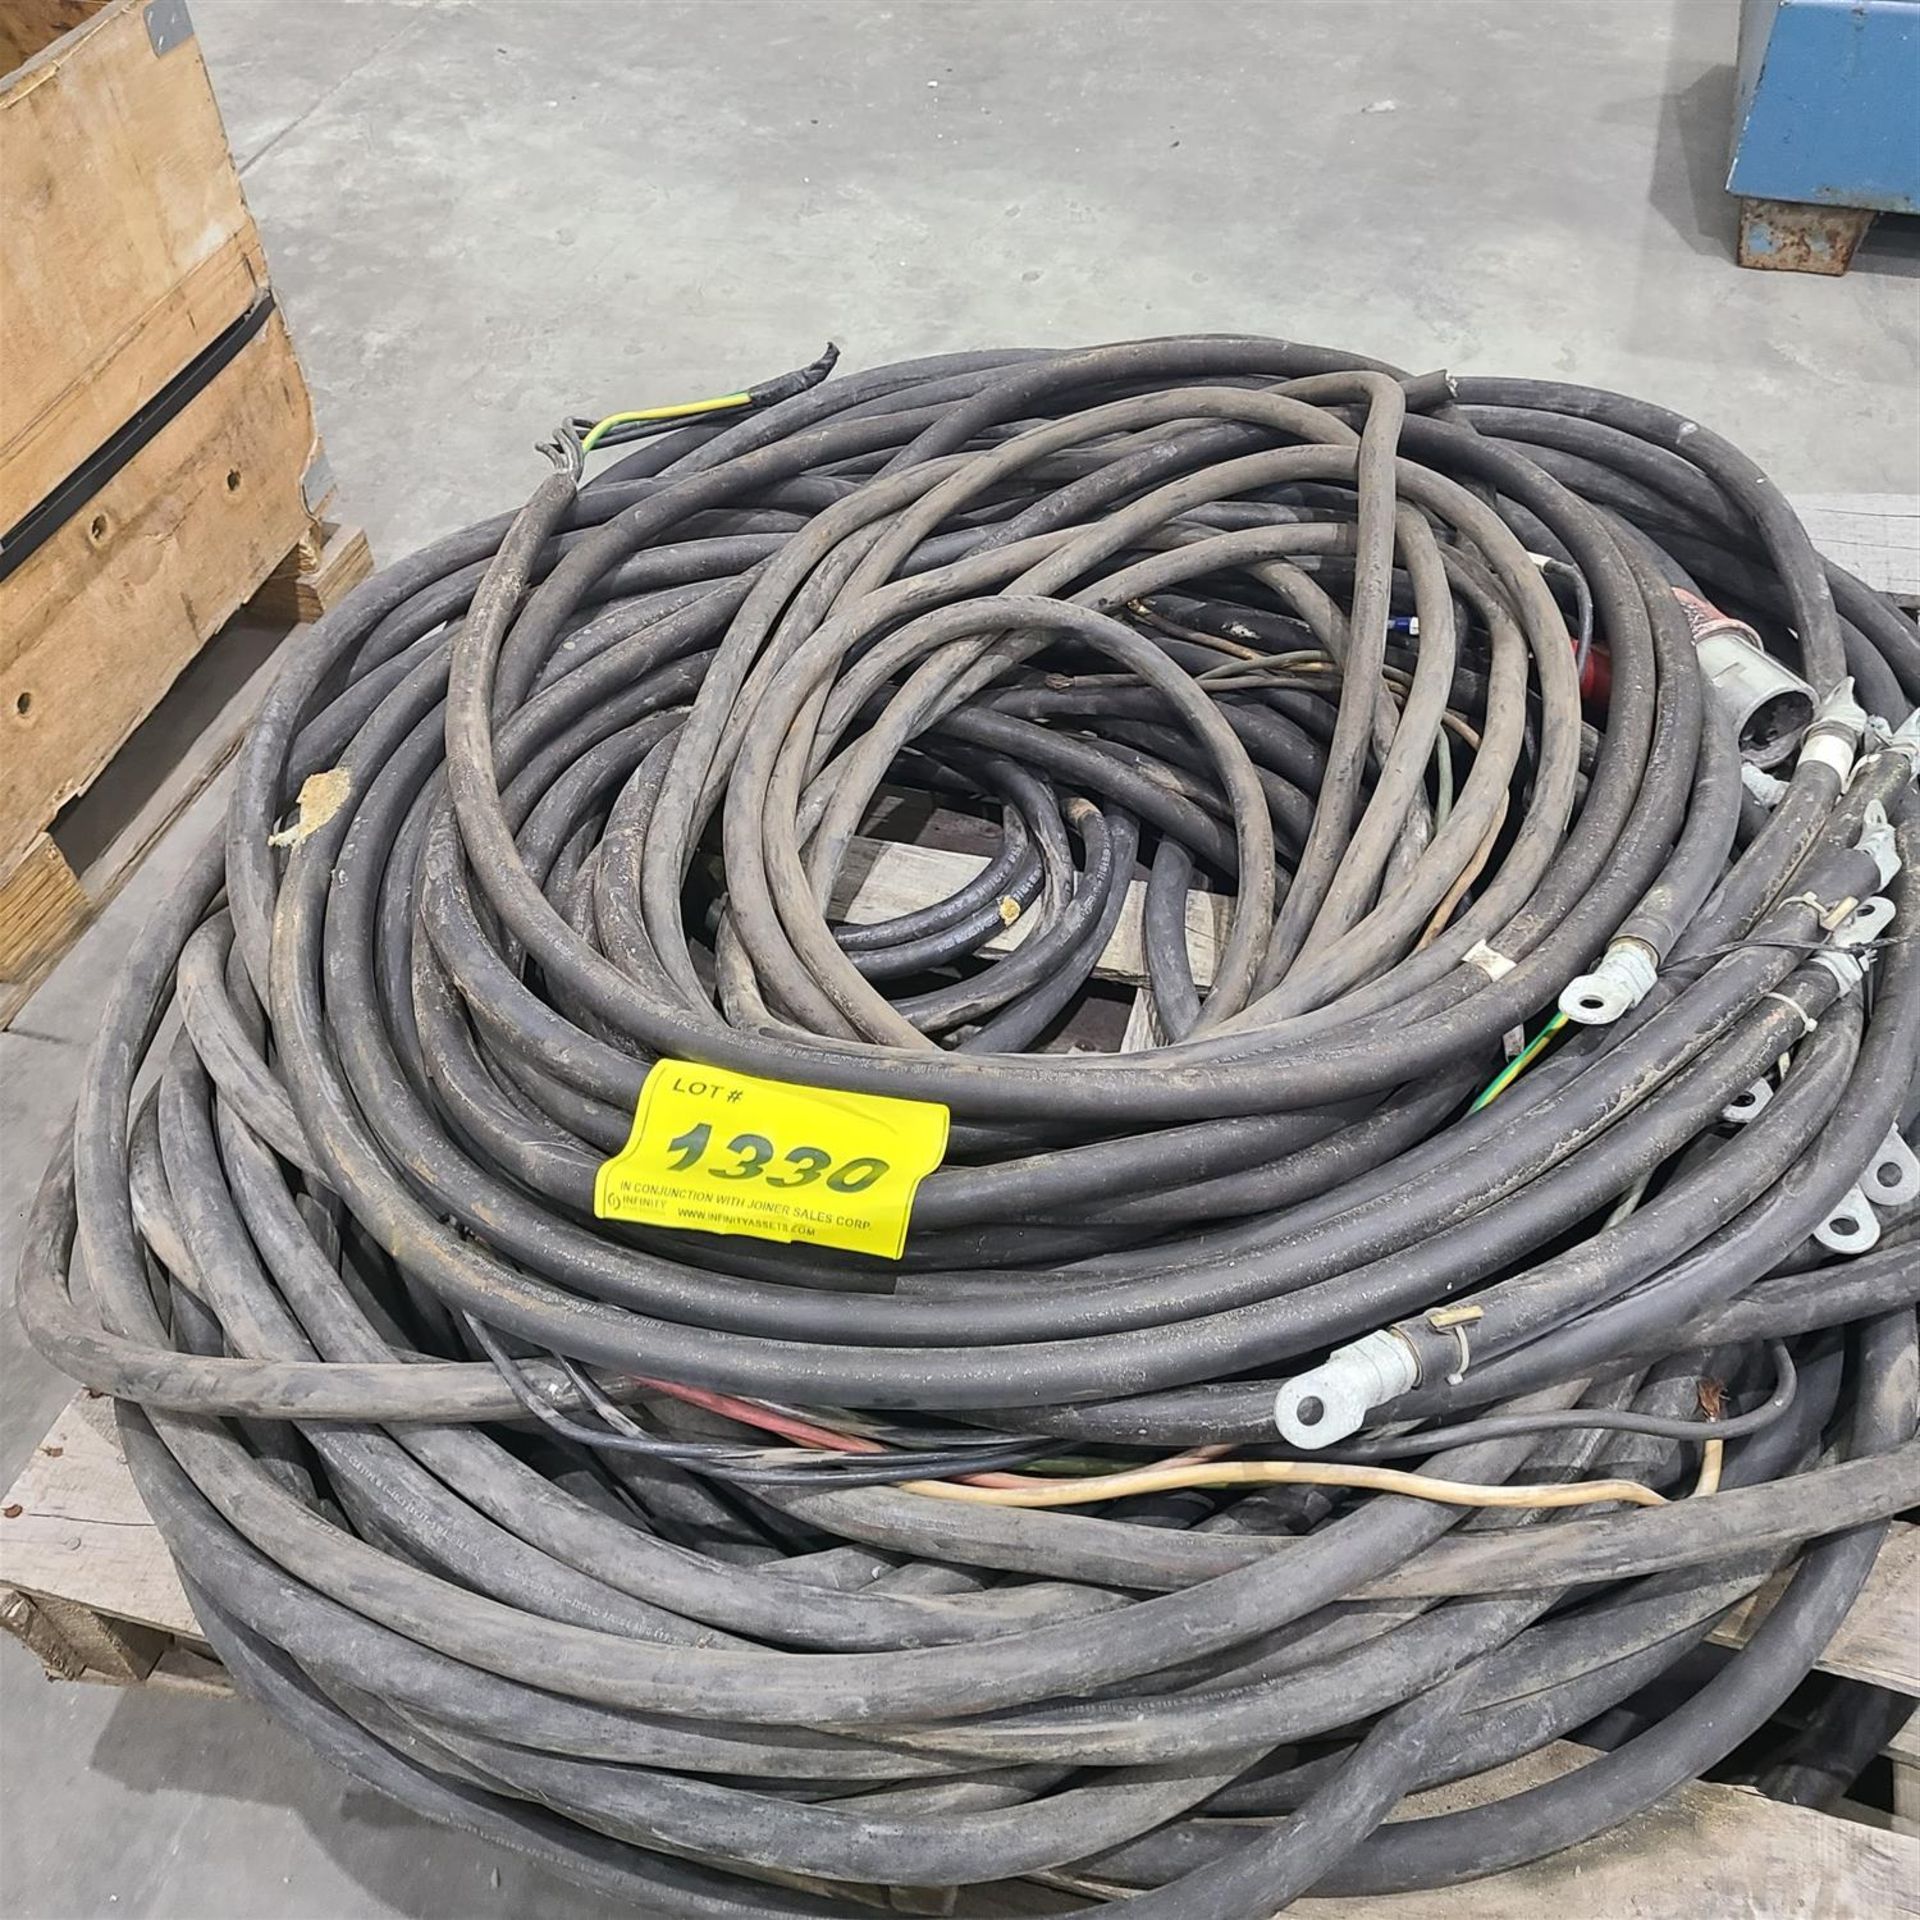 PALLET OF HD ELEC. CABLE